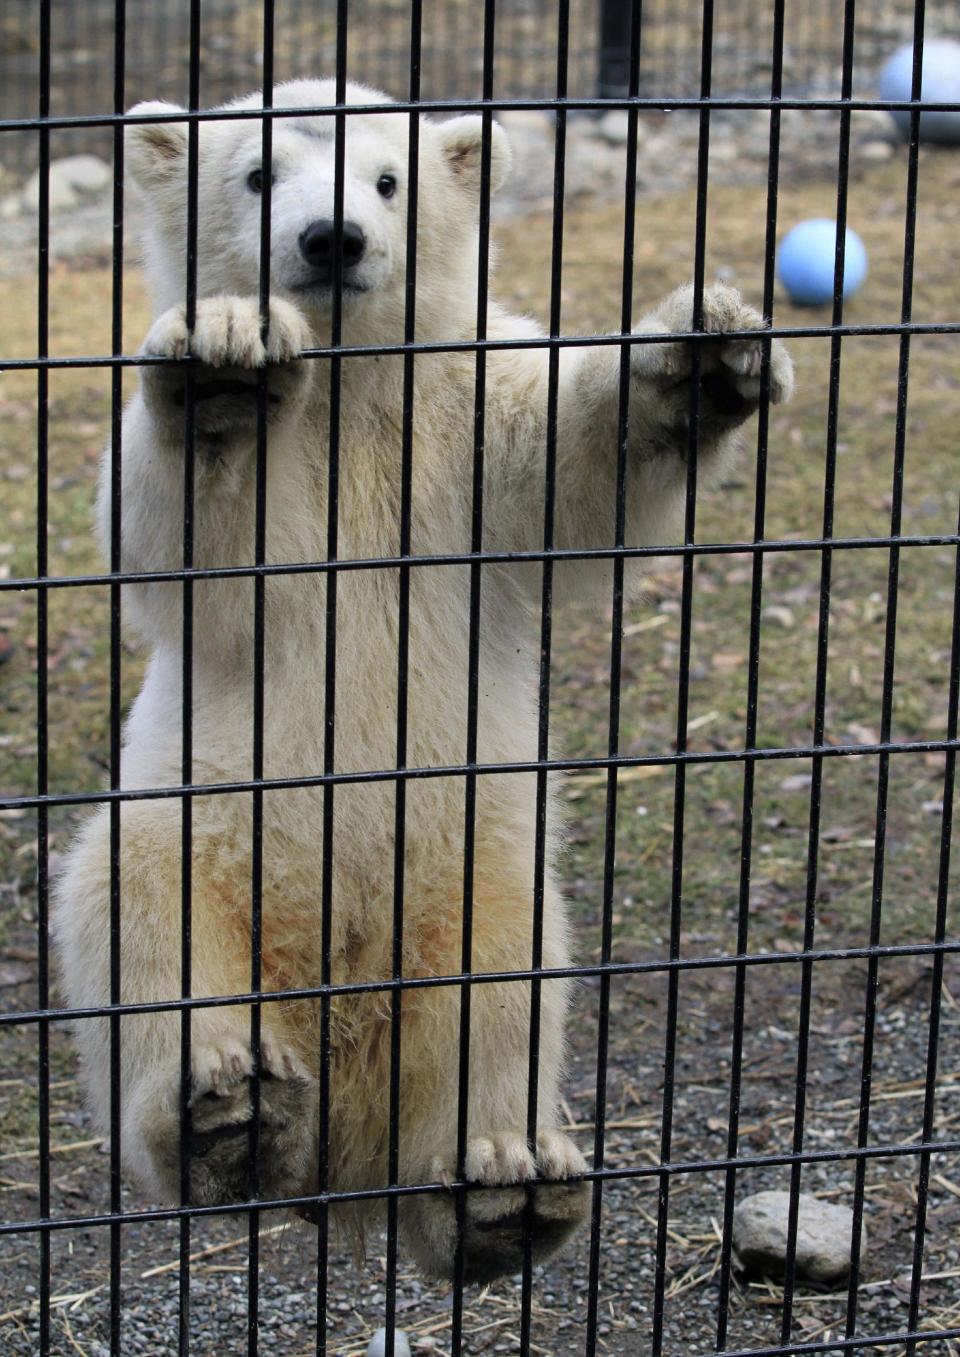 Kali, a polar bear cub orphaned when its mother was killed by a hunter in northwest Alaska, climbs the screen of his cage on Monday, May 13, 2013, at the Alaska Zoo in Anchorage, Alaska. UPS will fly the cub Tuesday to its new temporary home at the Buffalo Zoo. (AP Photo/Dan Joling)